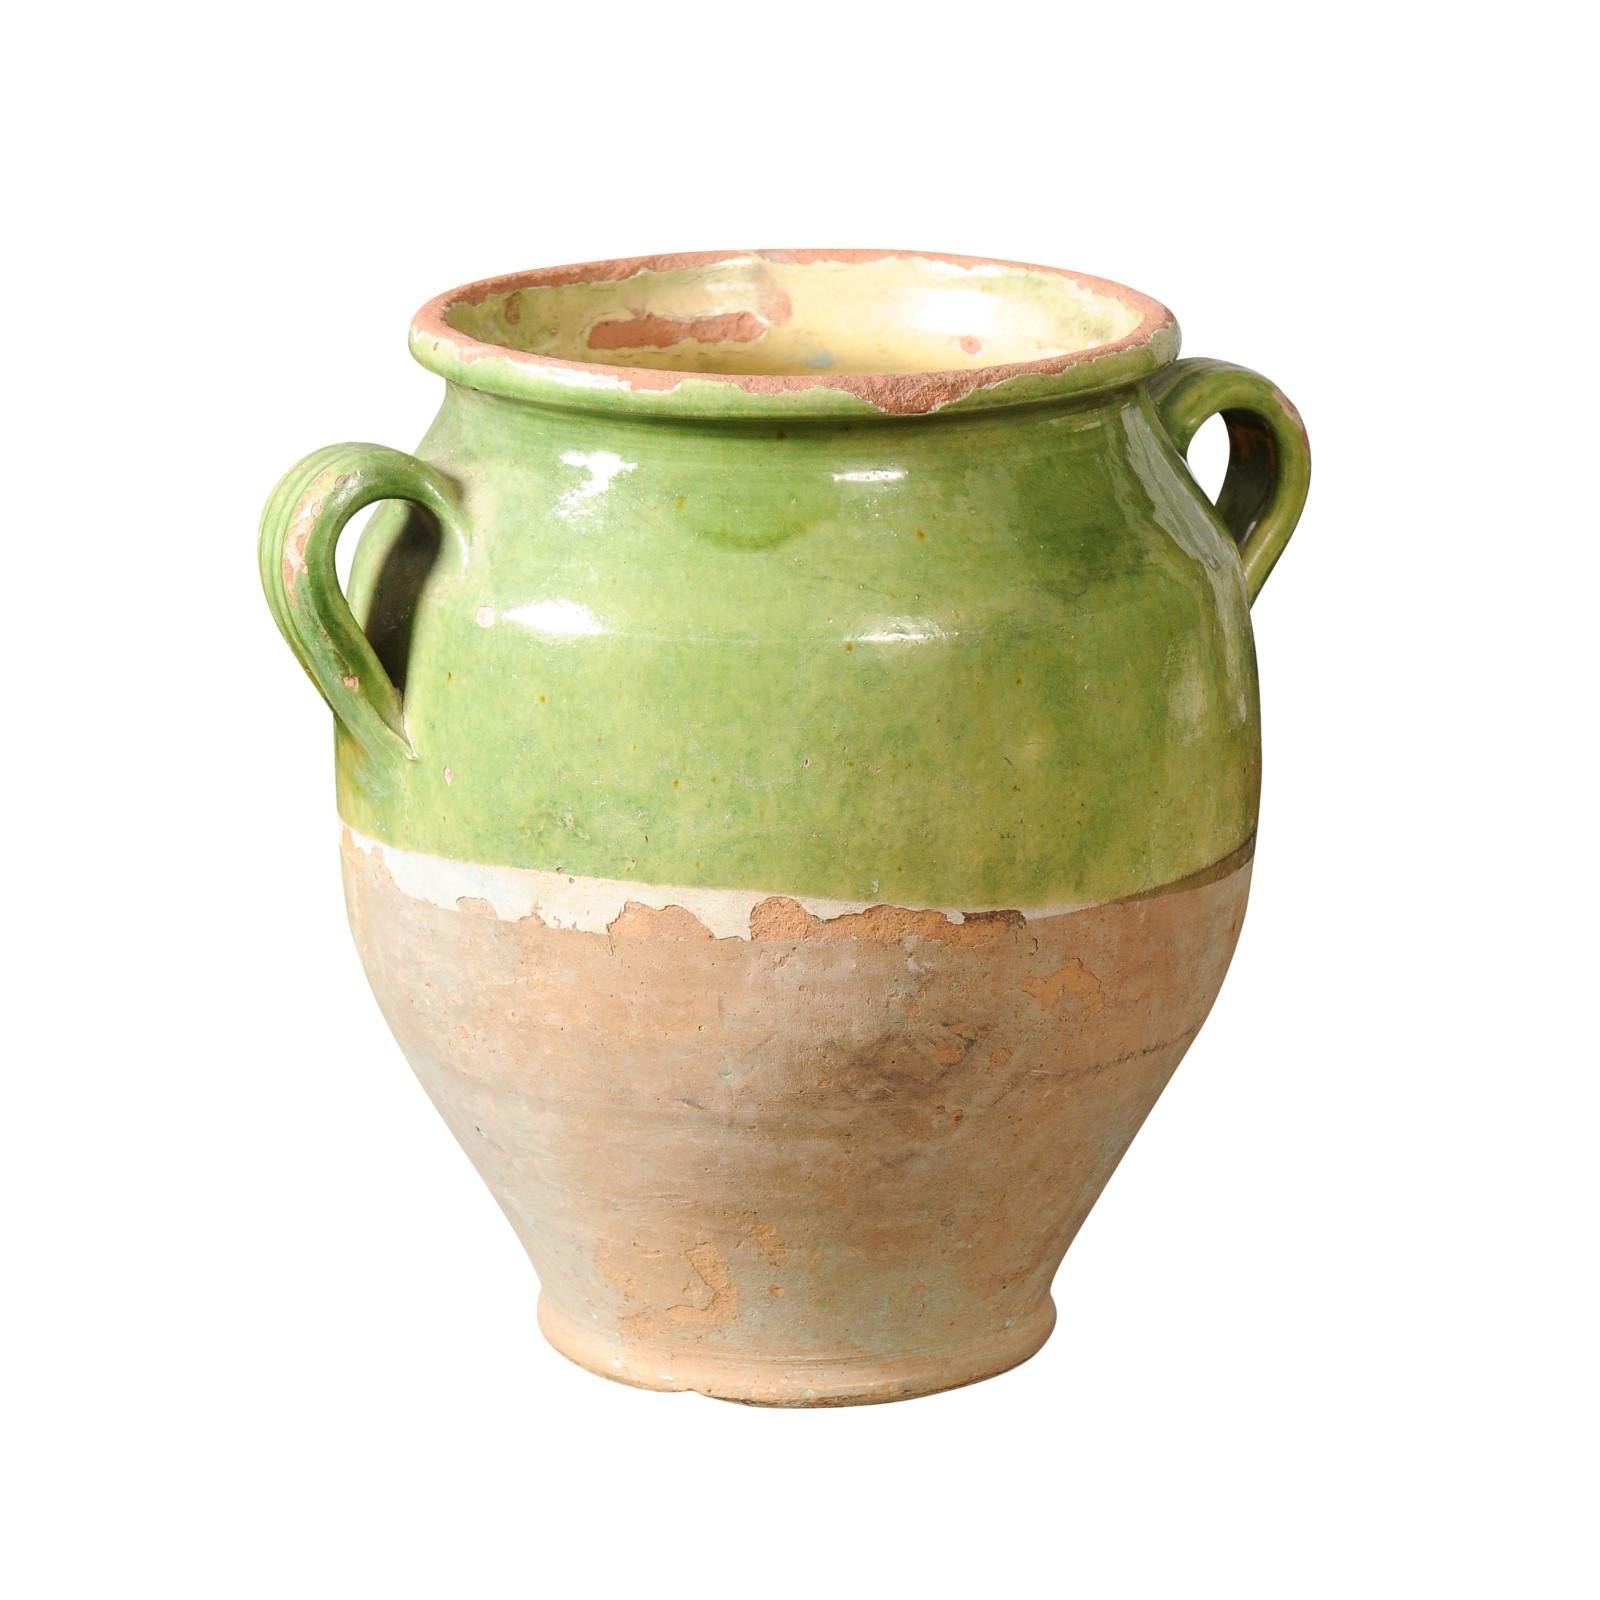 A French Provincial green glazed pot à confit from the 19th century, with two lateral handles. Steeped in rustic allure, this French Provincial pot à confit from the 19th century exudes a charm that resonates with the soul. Radiating an ethereal